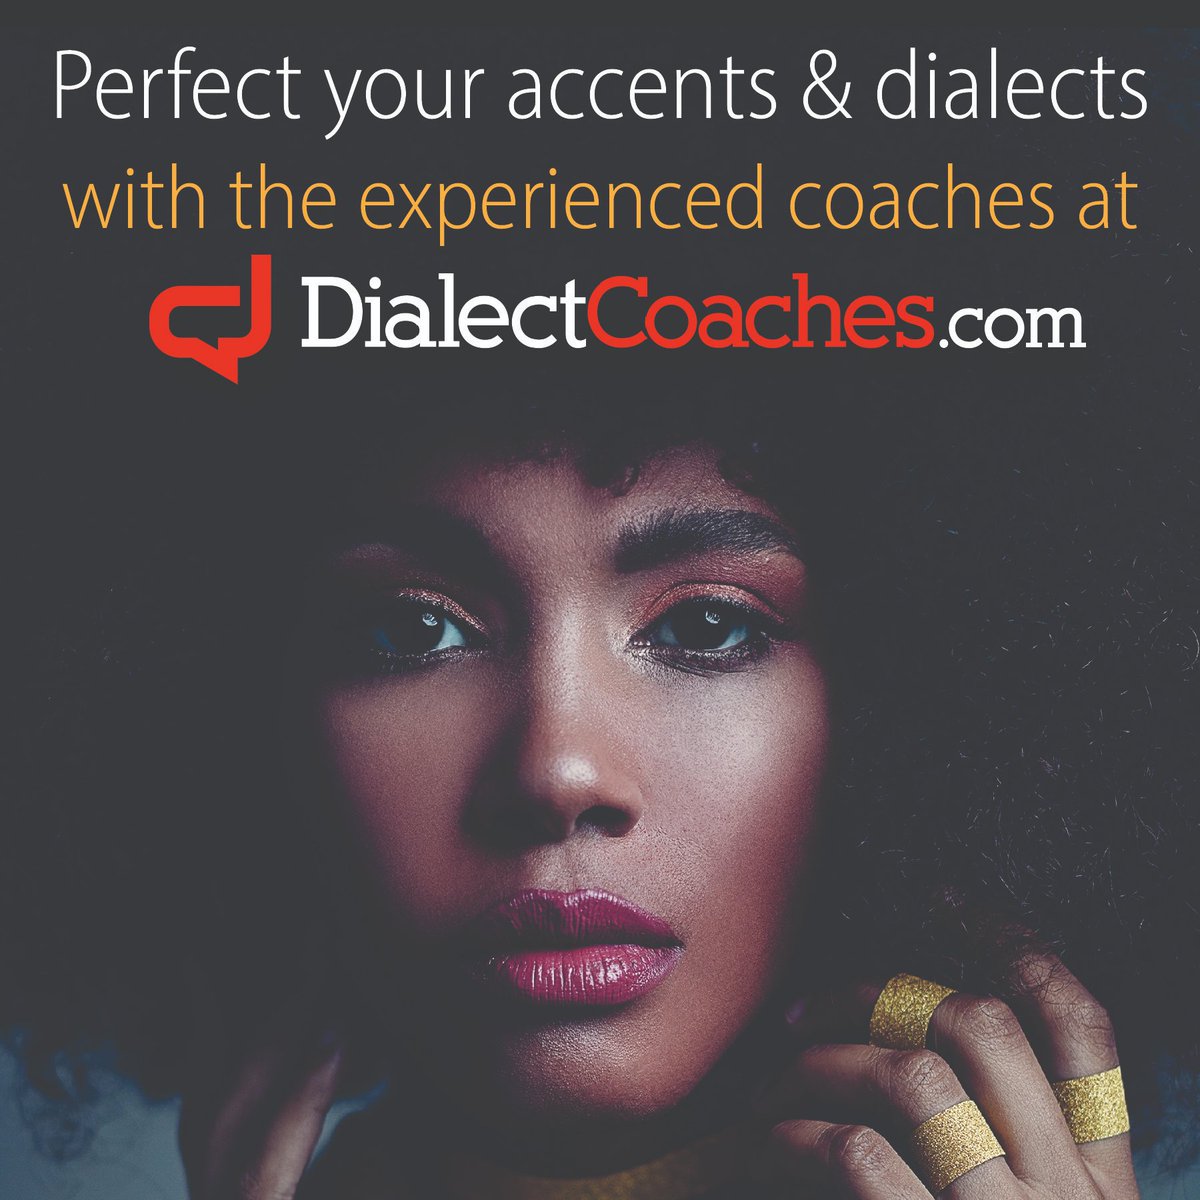 DialectCoaches.com #SelfPromotionSaturday #acting #actorlife #actorslife #actorslife🎬 #actor #actors #accents #accentcoach #dialectcoach